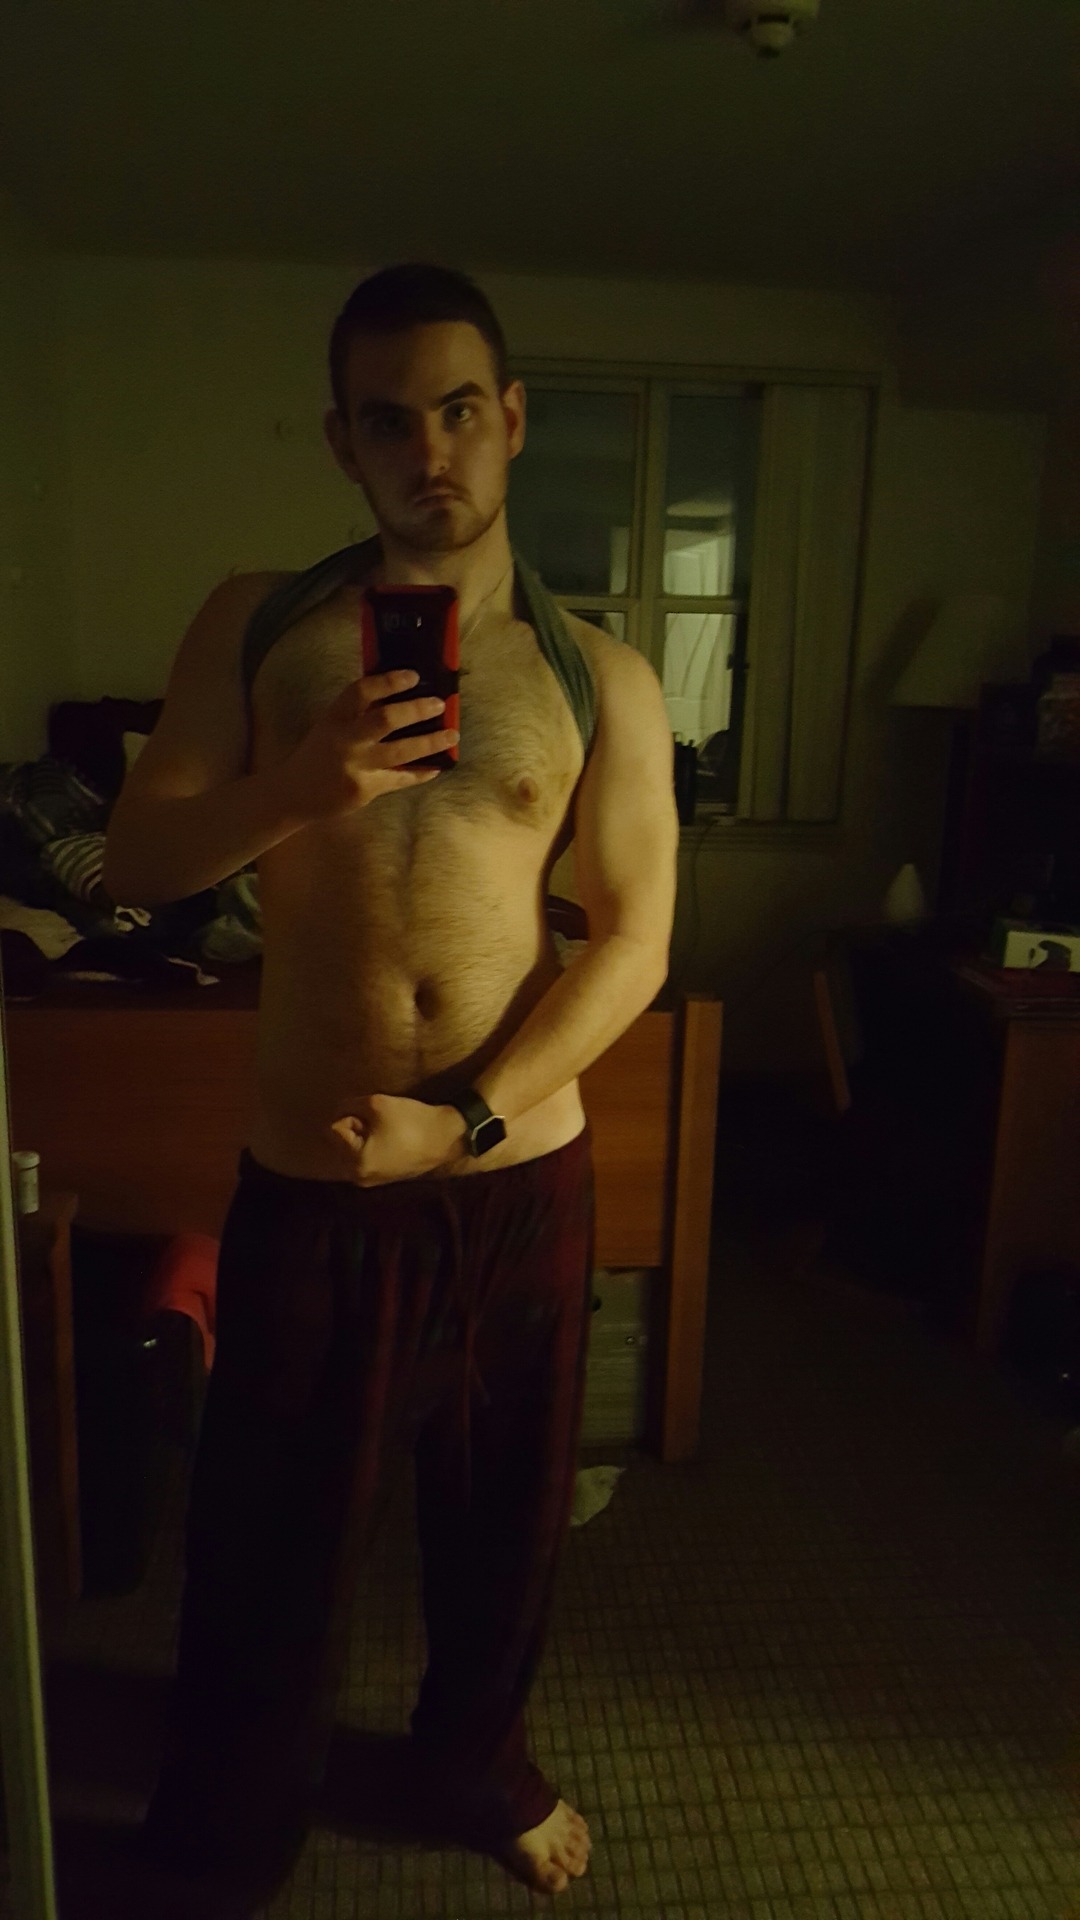 patric-k-c:Another progress photo here, so happy with how my arms and abs are growing.